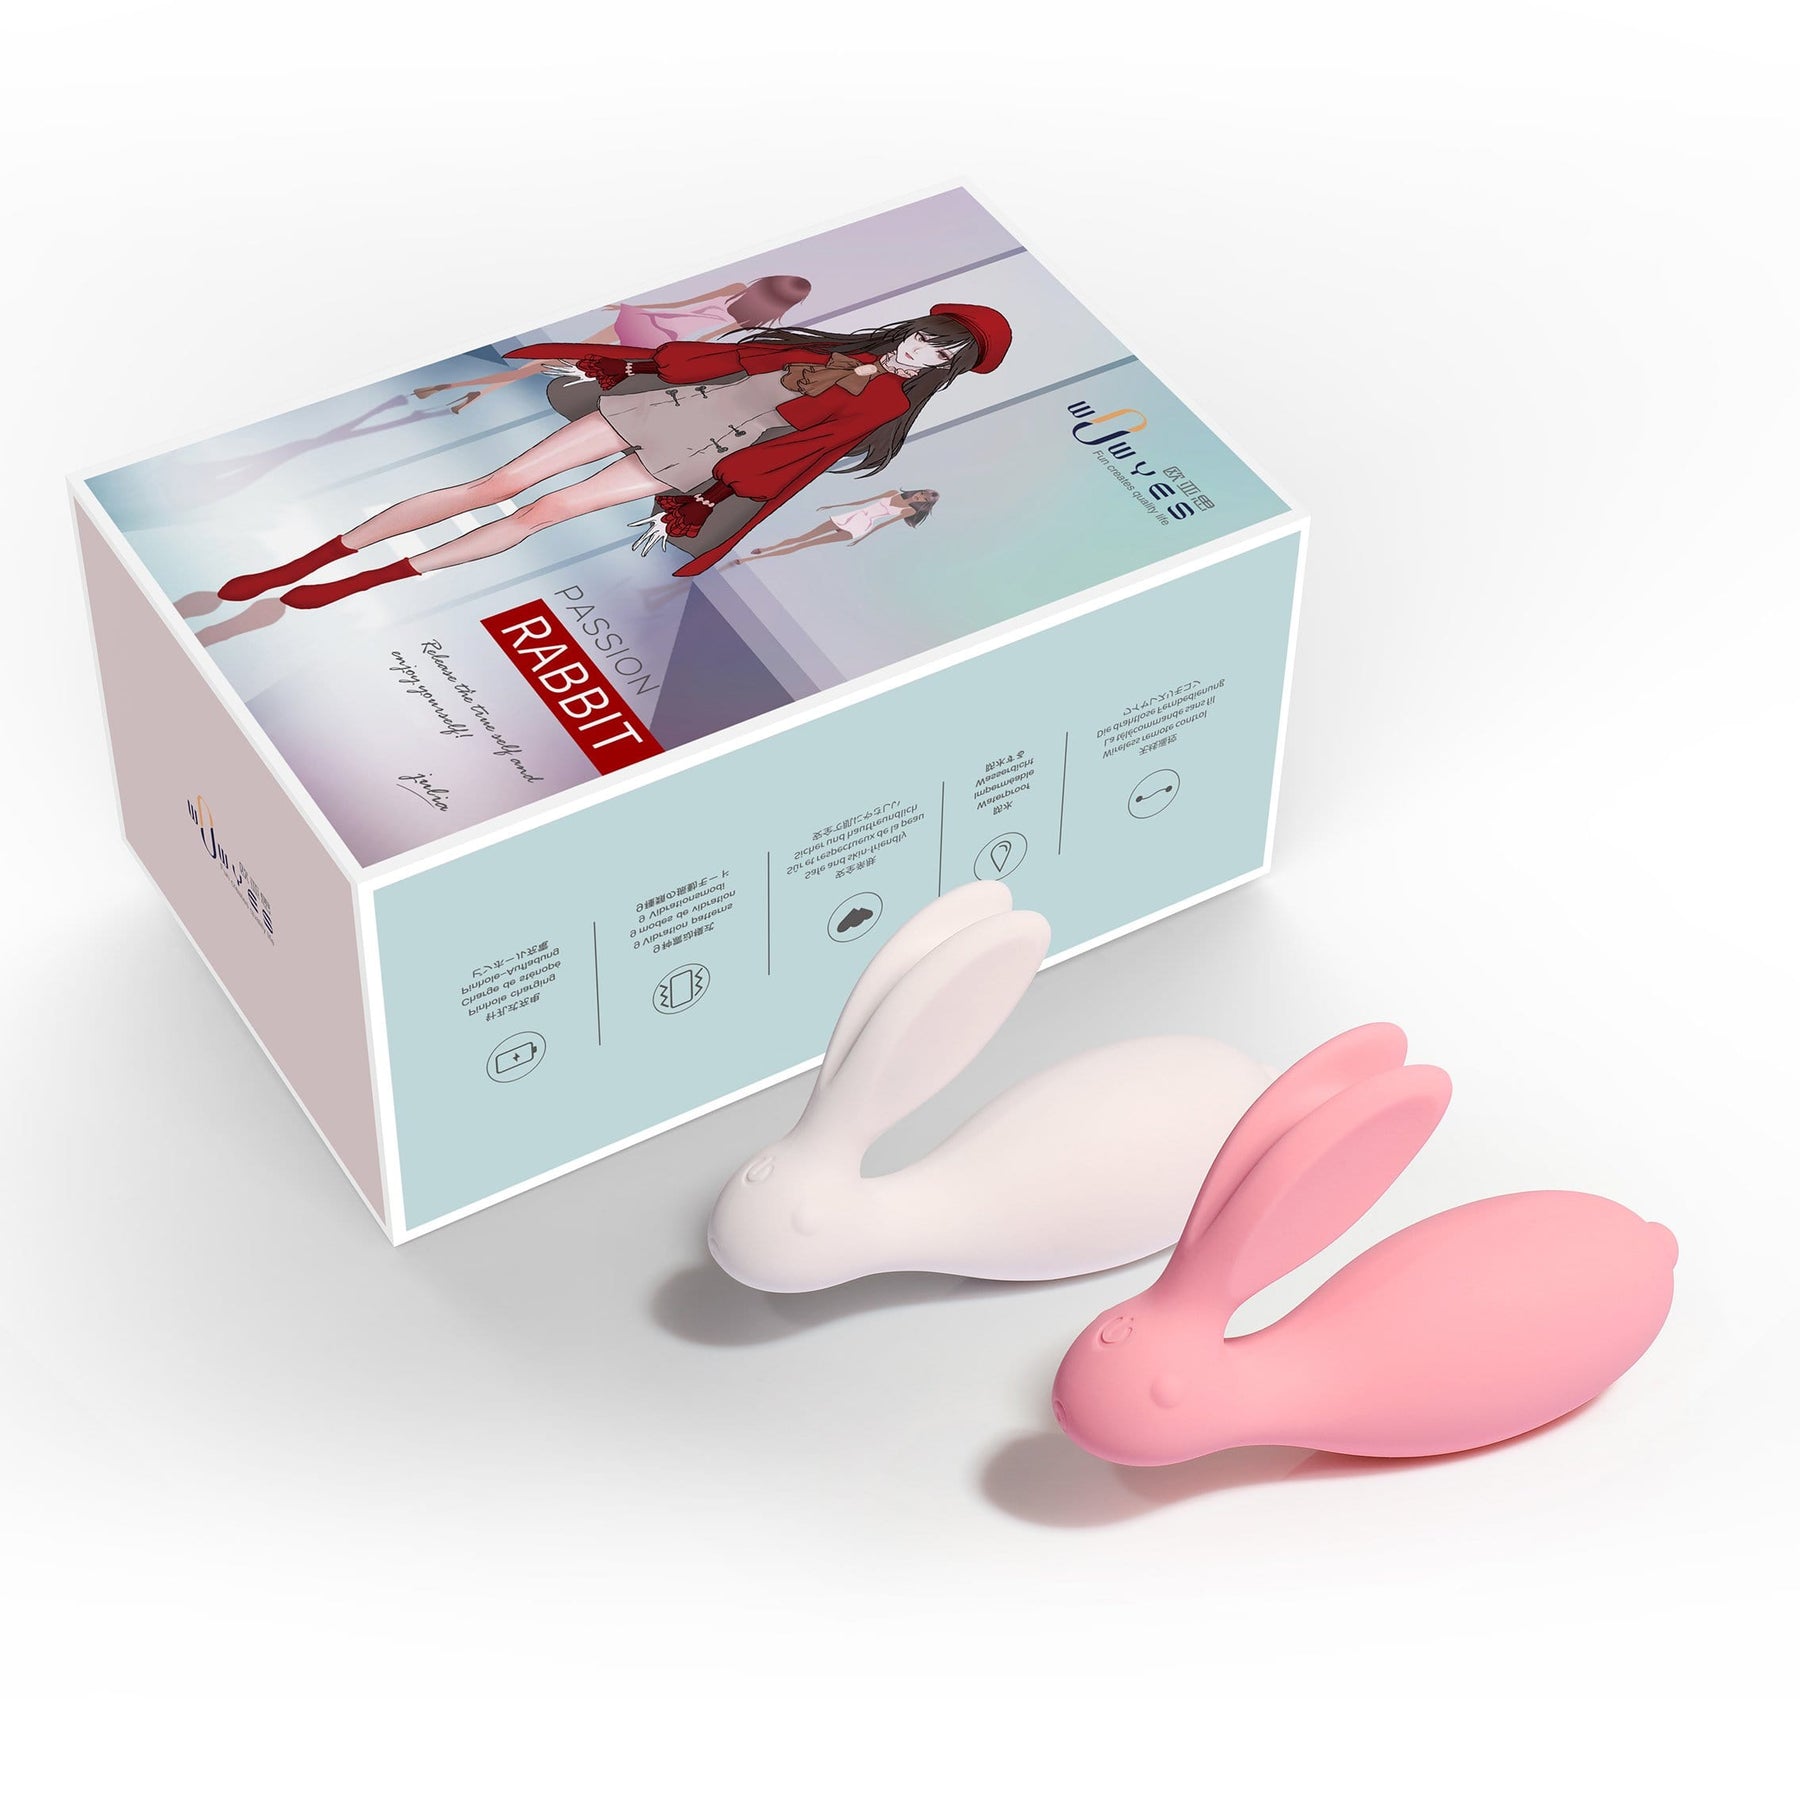 2021 Newest Edition WOWYES Rabbit 7C Wireless /App Control Long Distance Love Egg Vibrator For Her